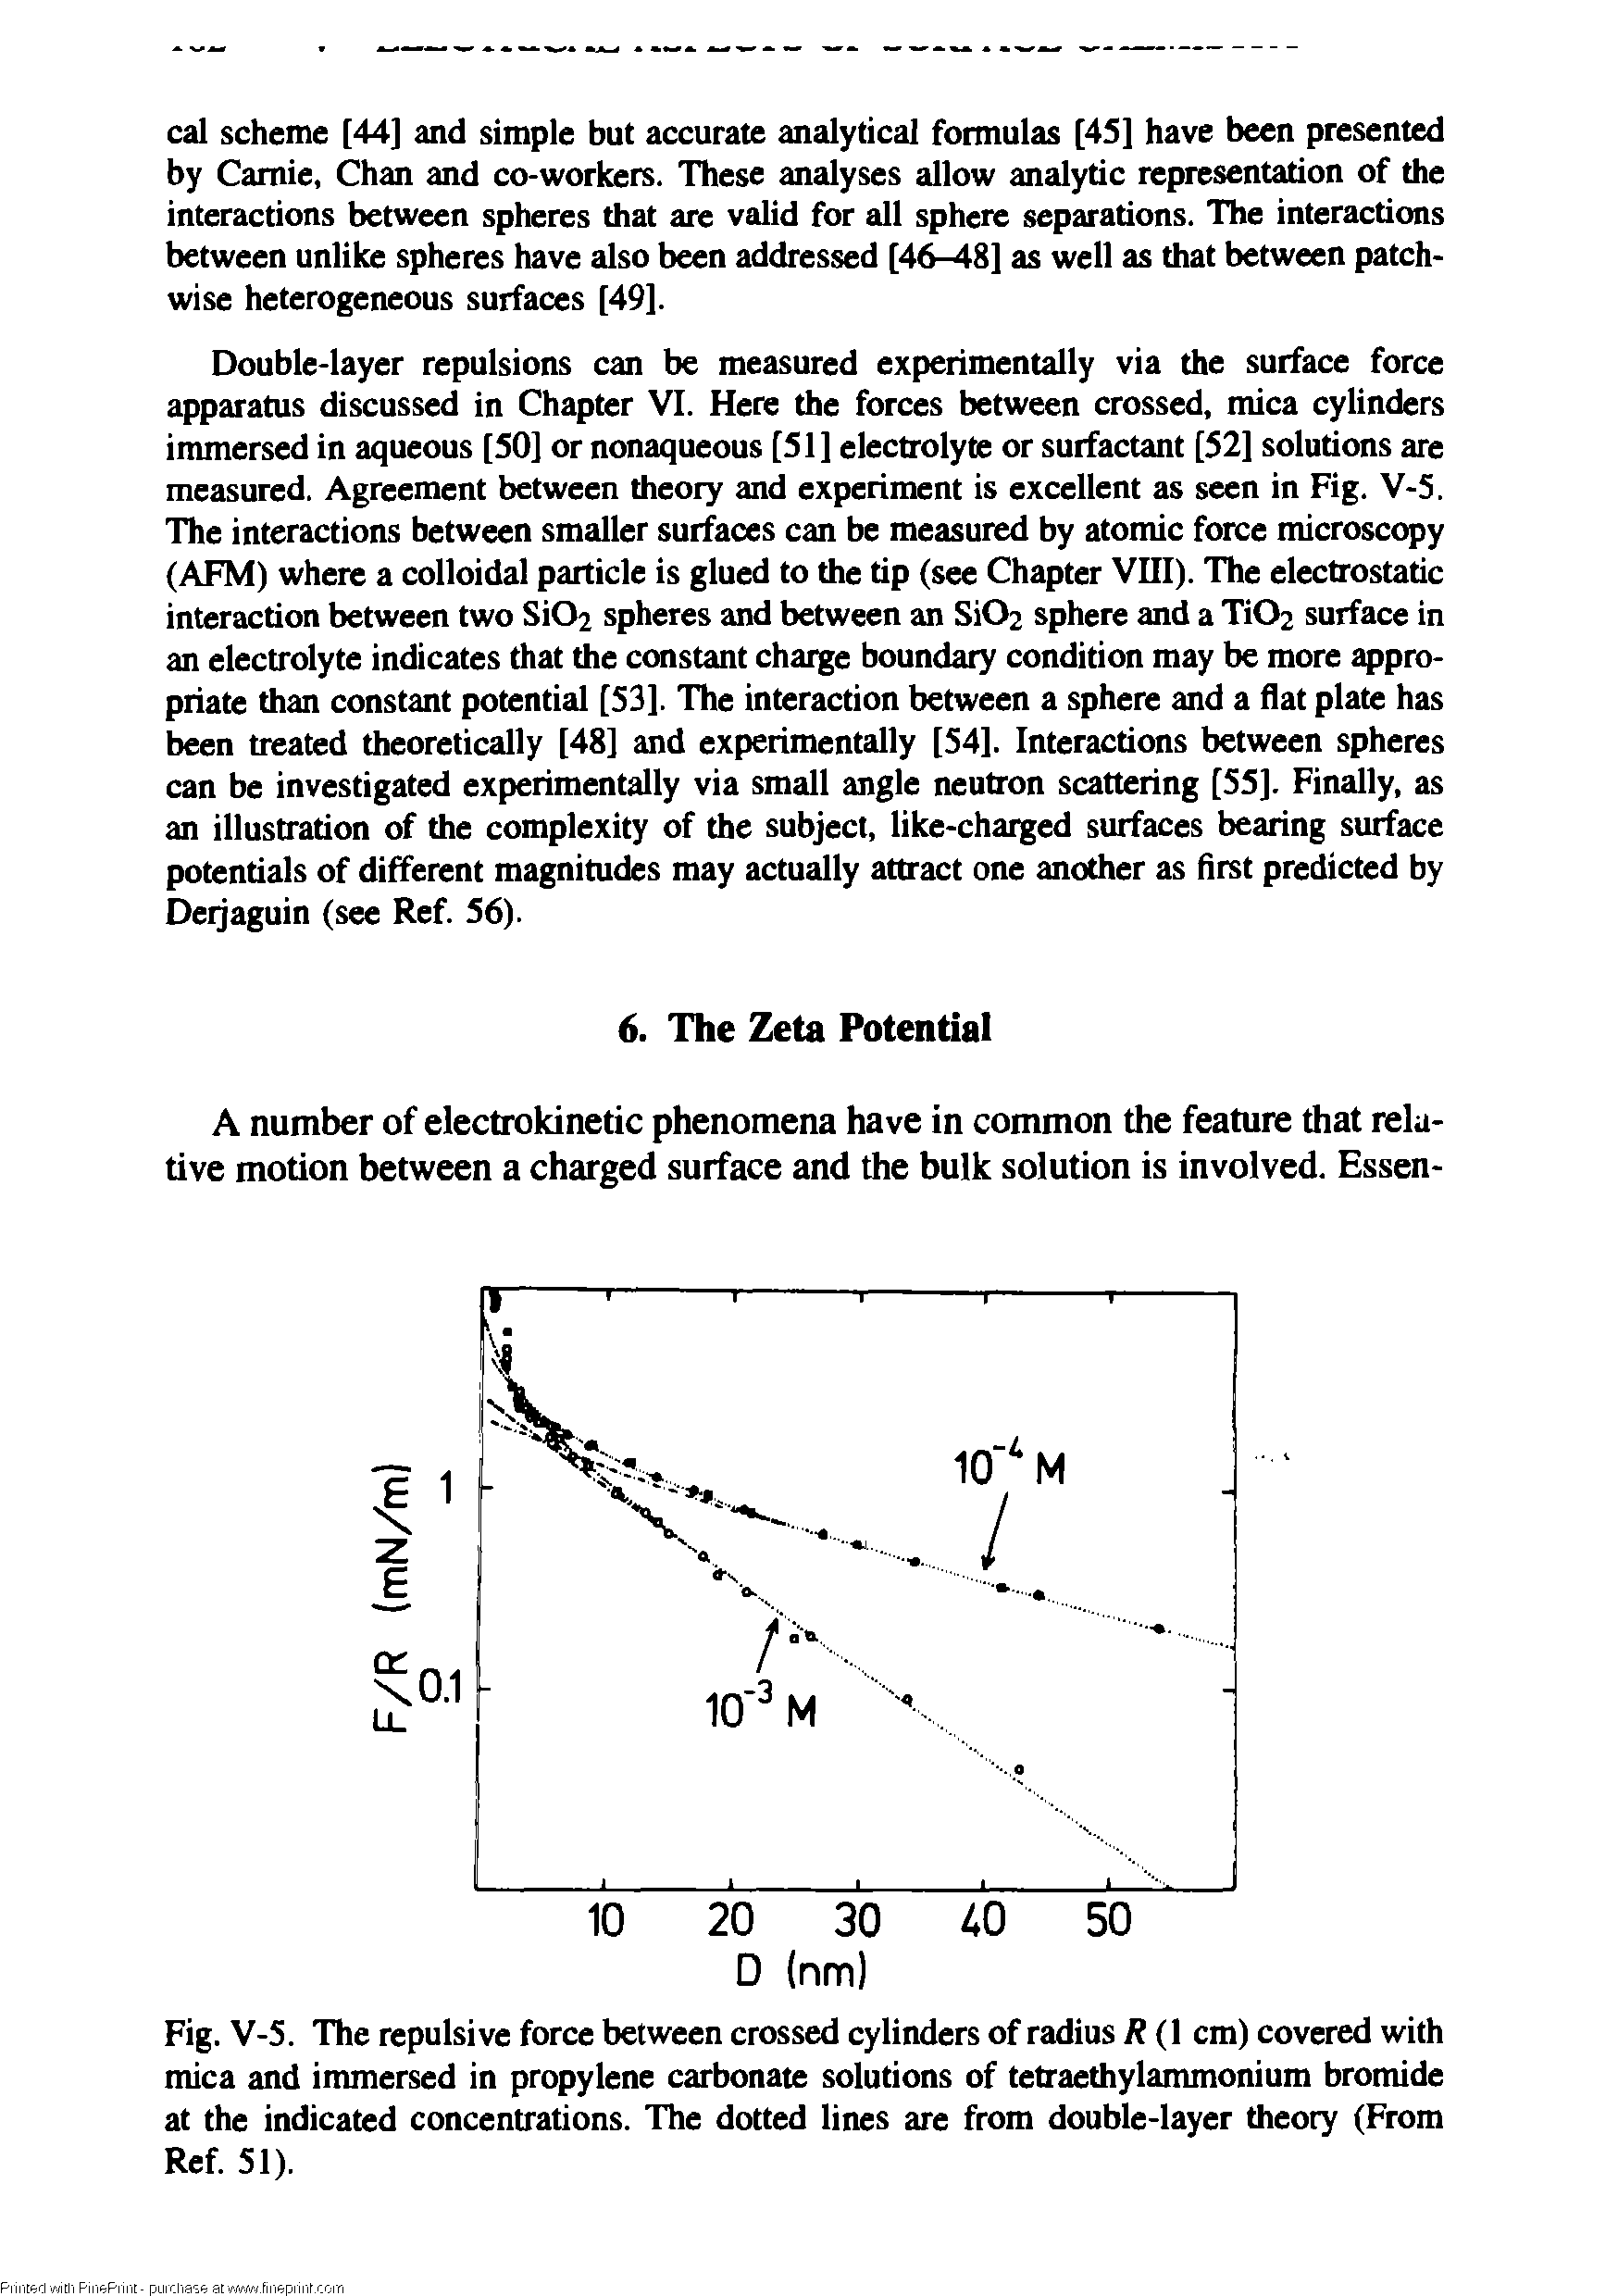 Fig. V-5. The repulsive force between crossed cylinders of radius R (1 cm) covered with mica and immersed in propylene carbonate solutions of tetraethylammonium bromide at the indicated concentrations. The dotted lines are from double-layer theory (From Ref. 51).